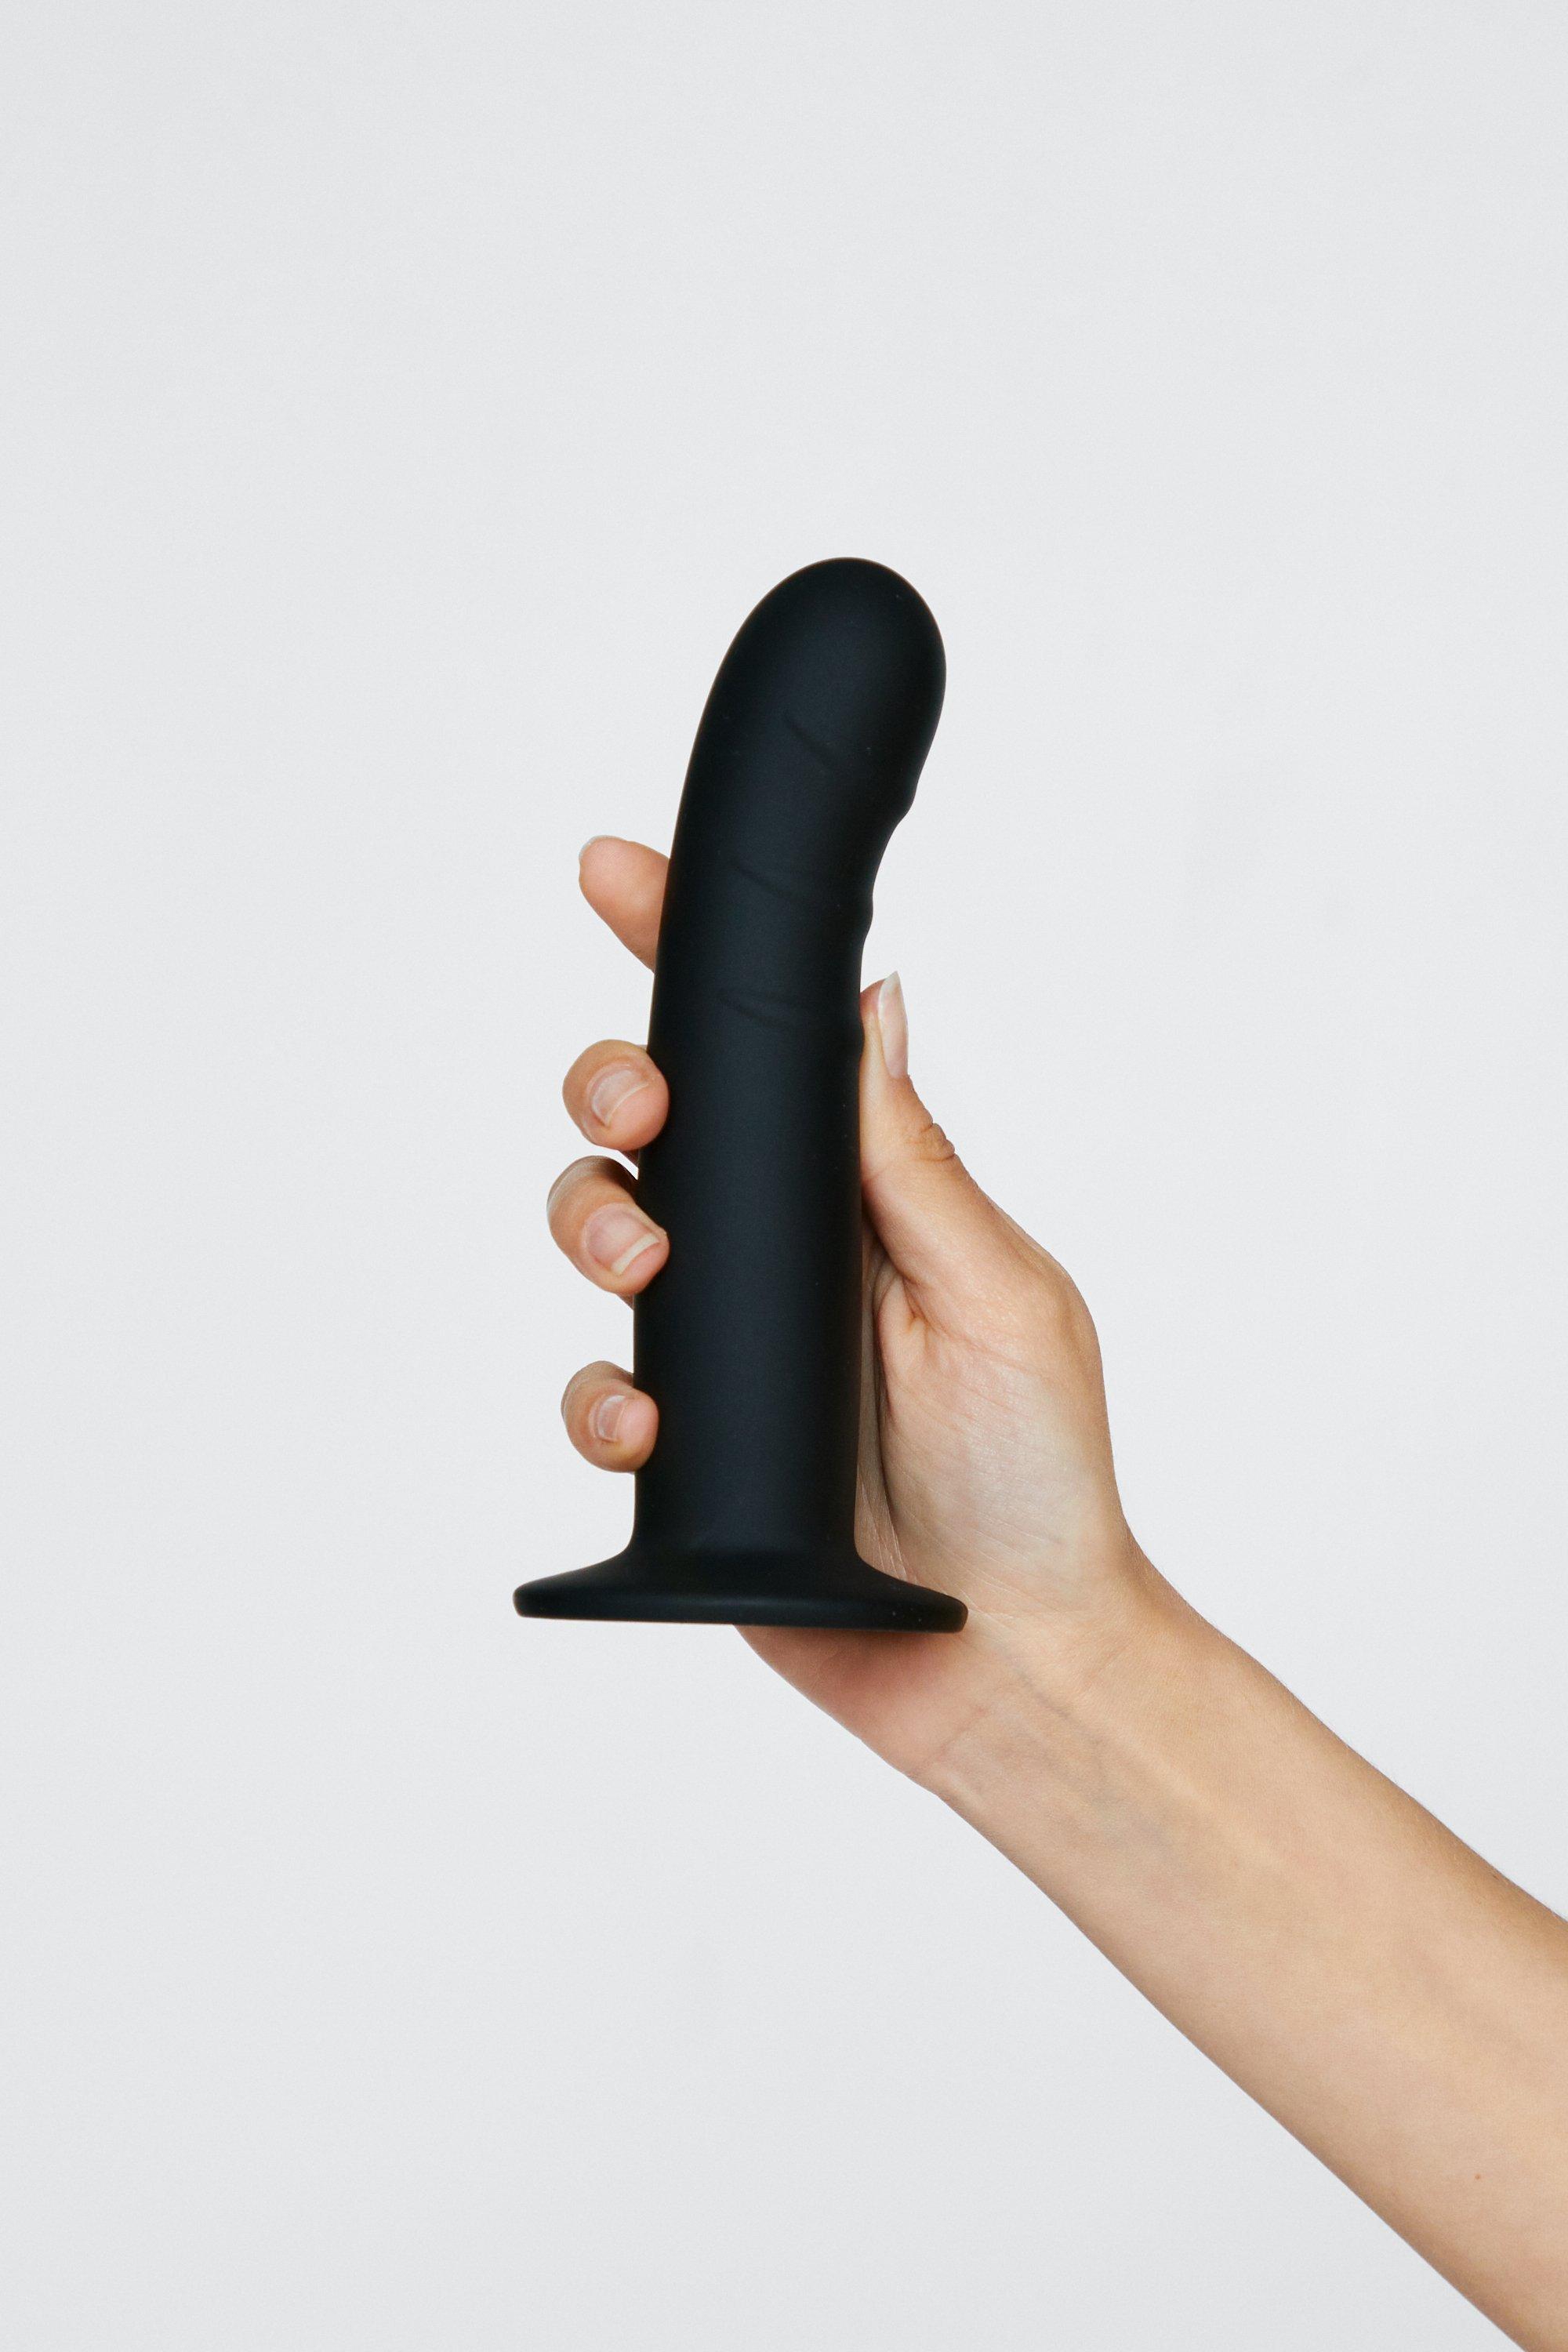 Give It To Me Large Dildo Nasty picture